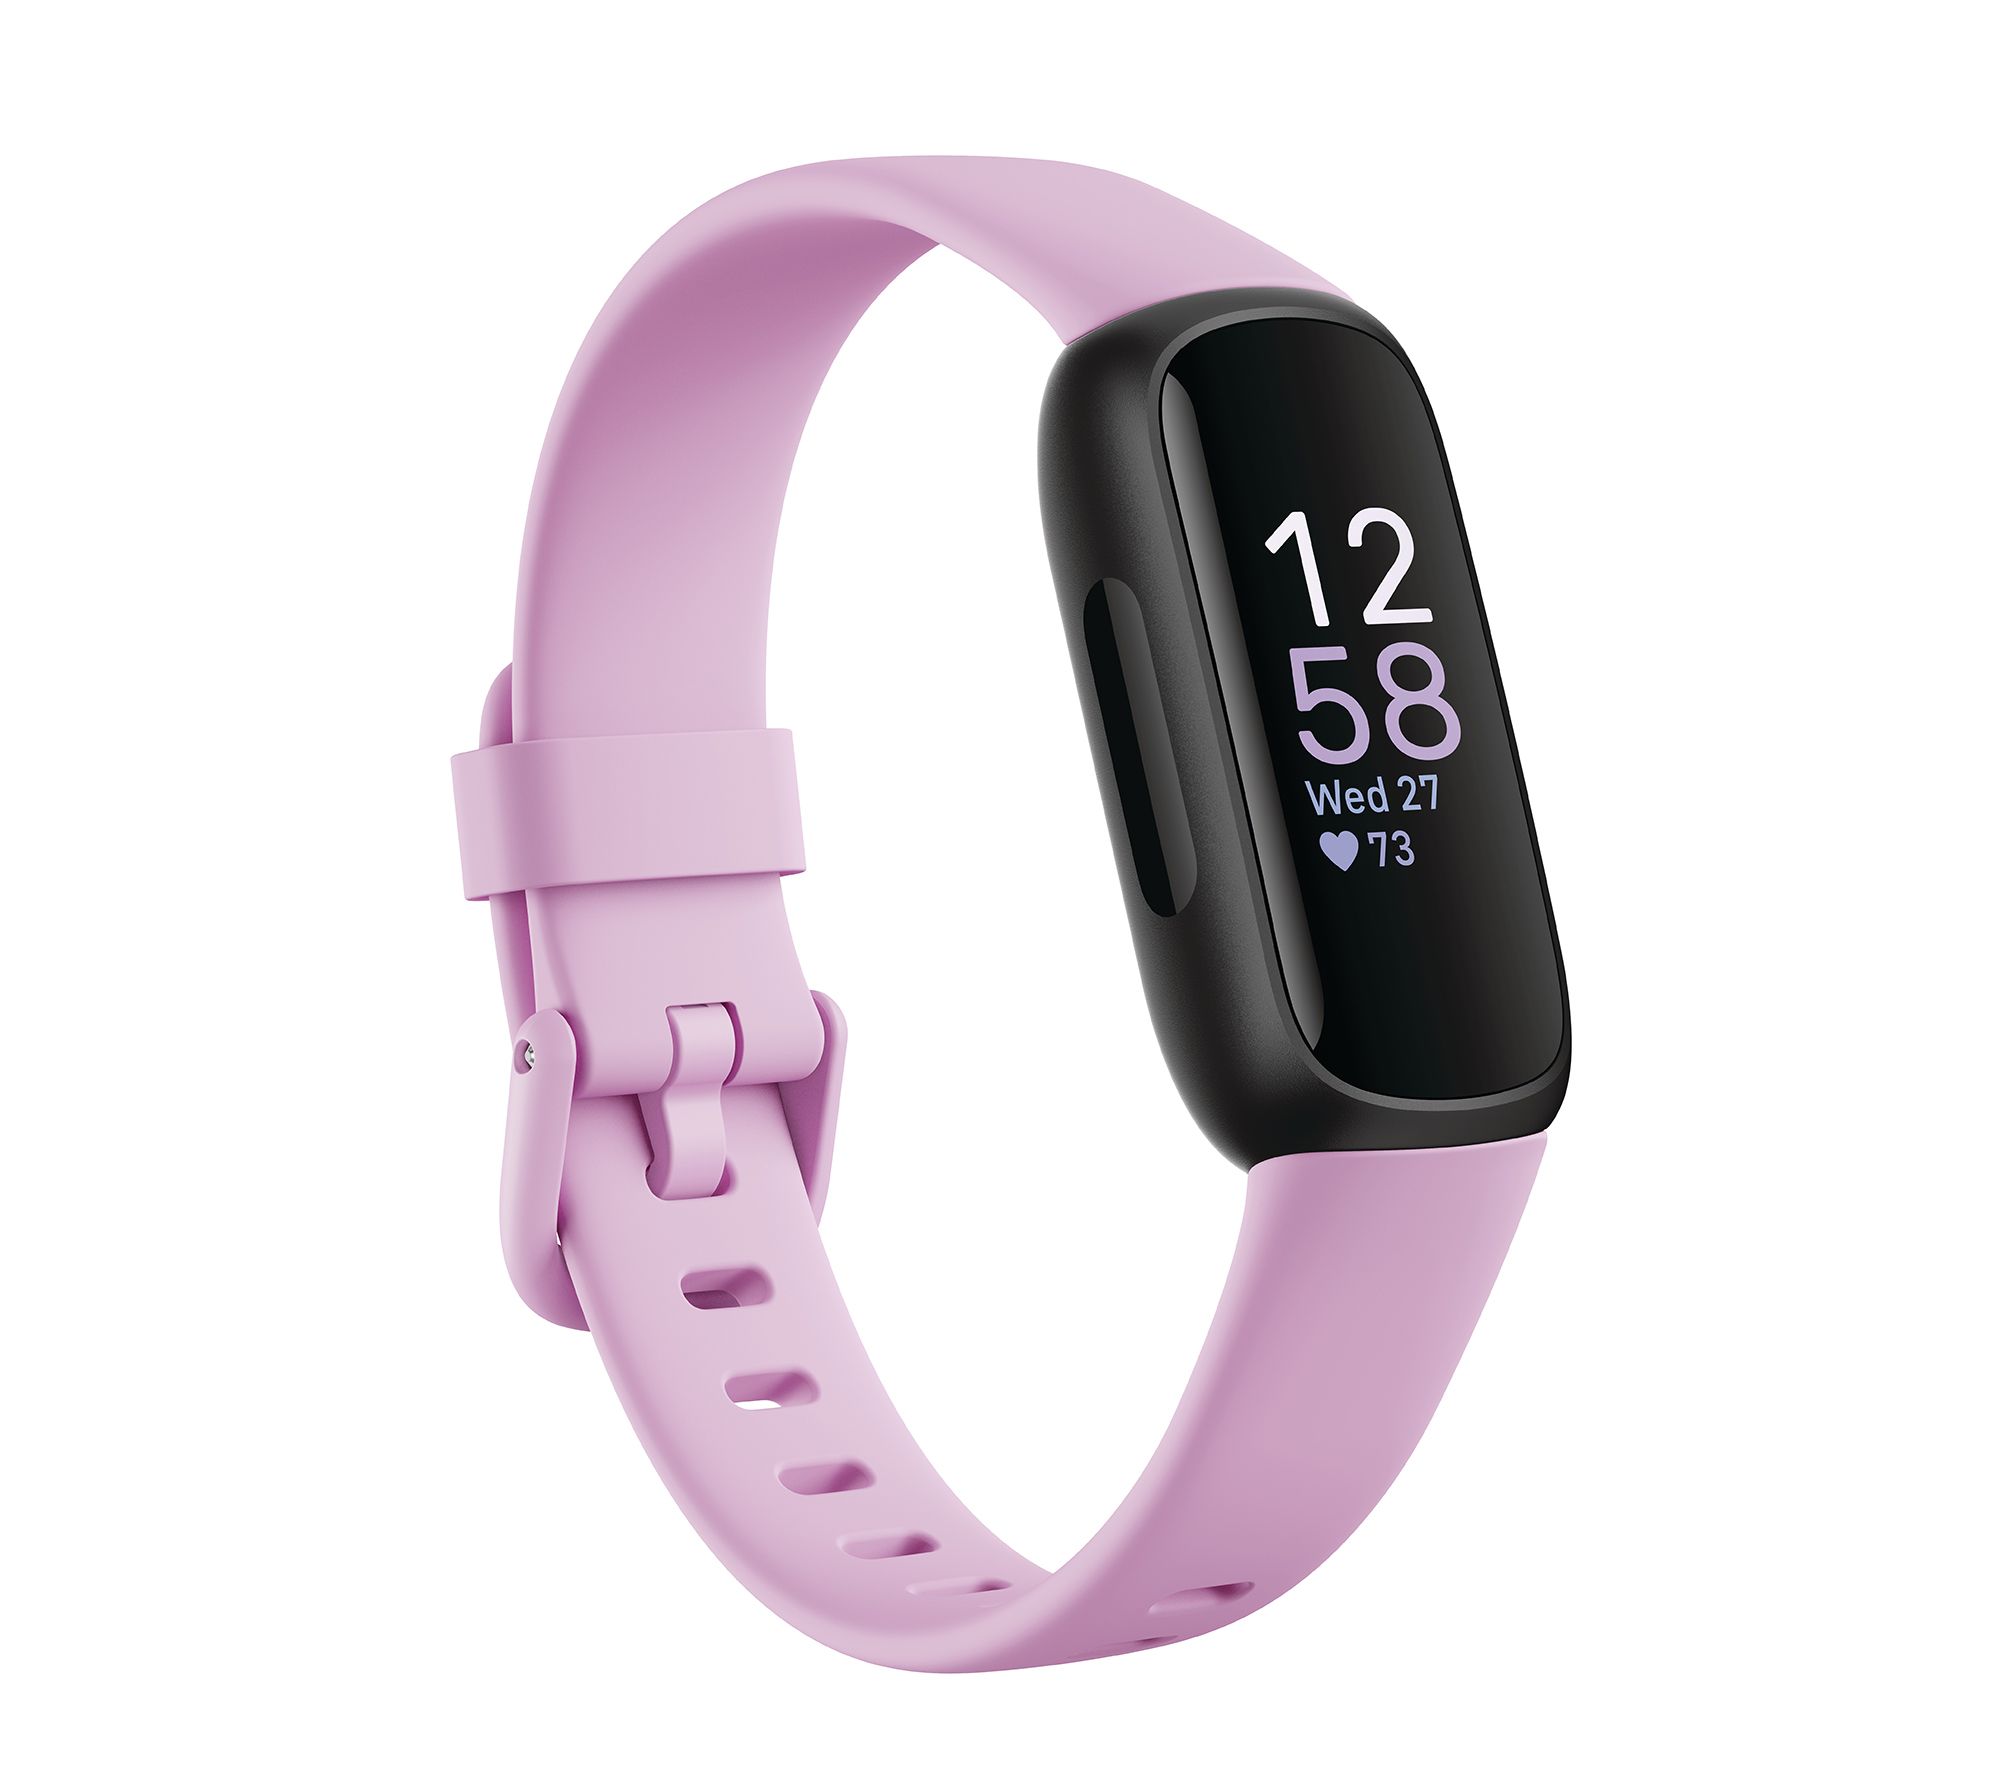 NEW Fitbit Inspire 3 Fitness Tracker Announced (9 Things to Know